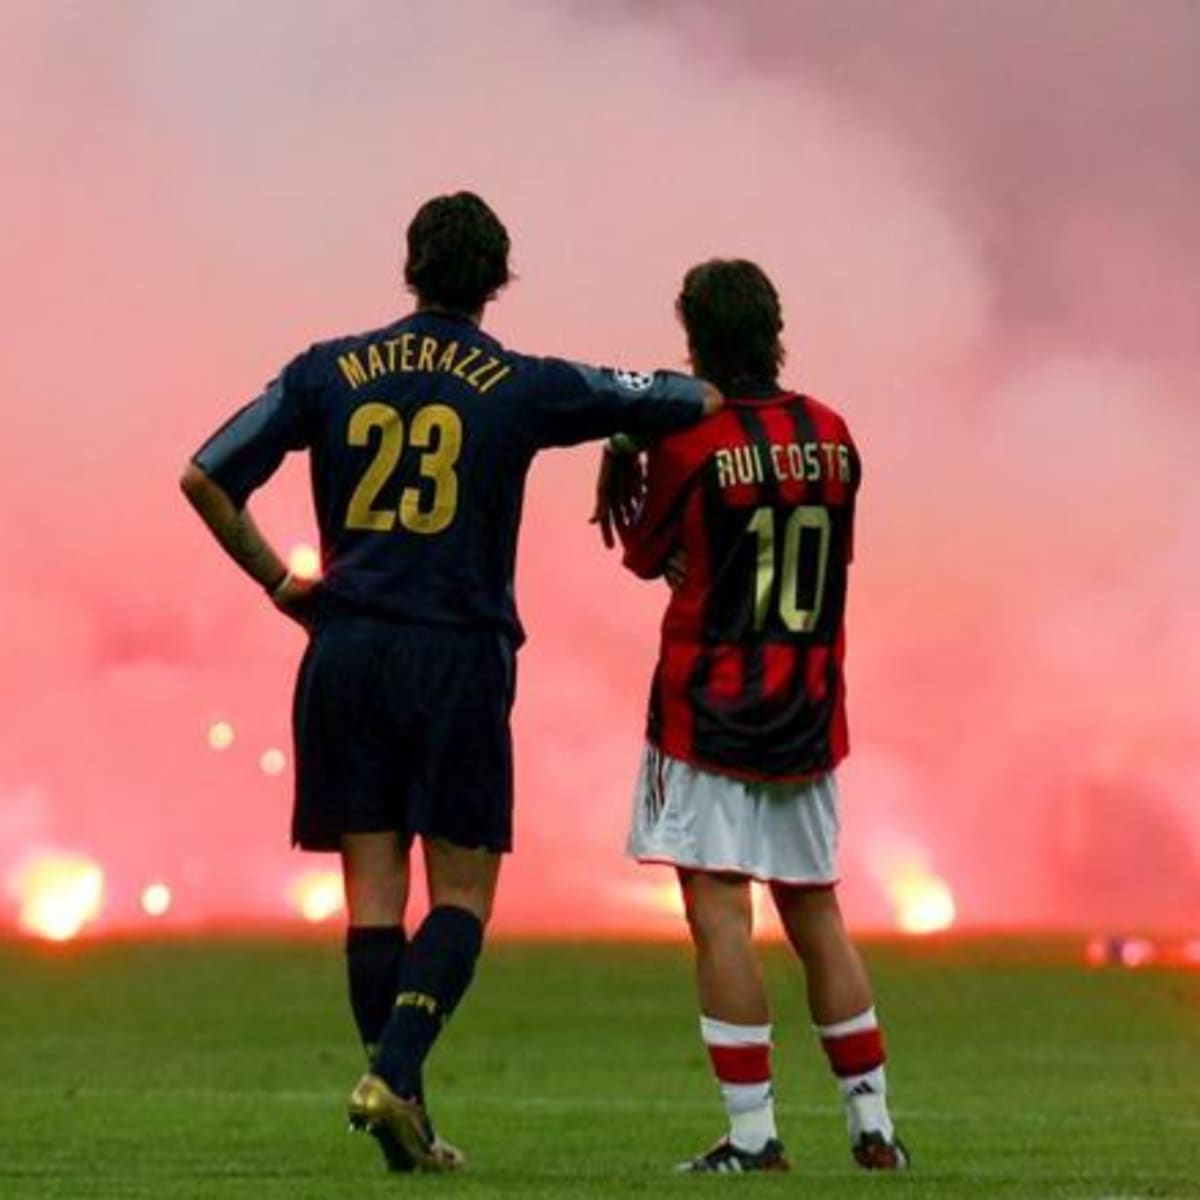 lade forhold analysere 15 Best Football (Soccer) Derbies/Rivalries in the World - HowTheyPlay